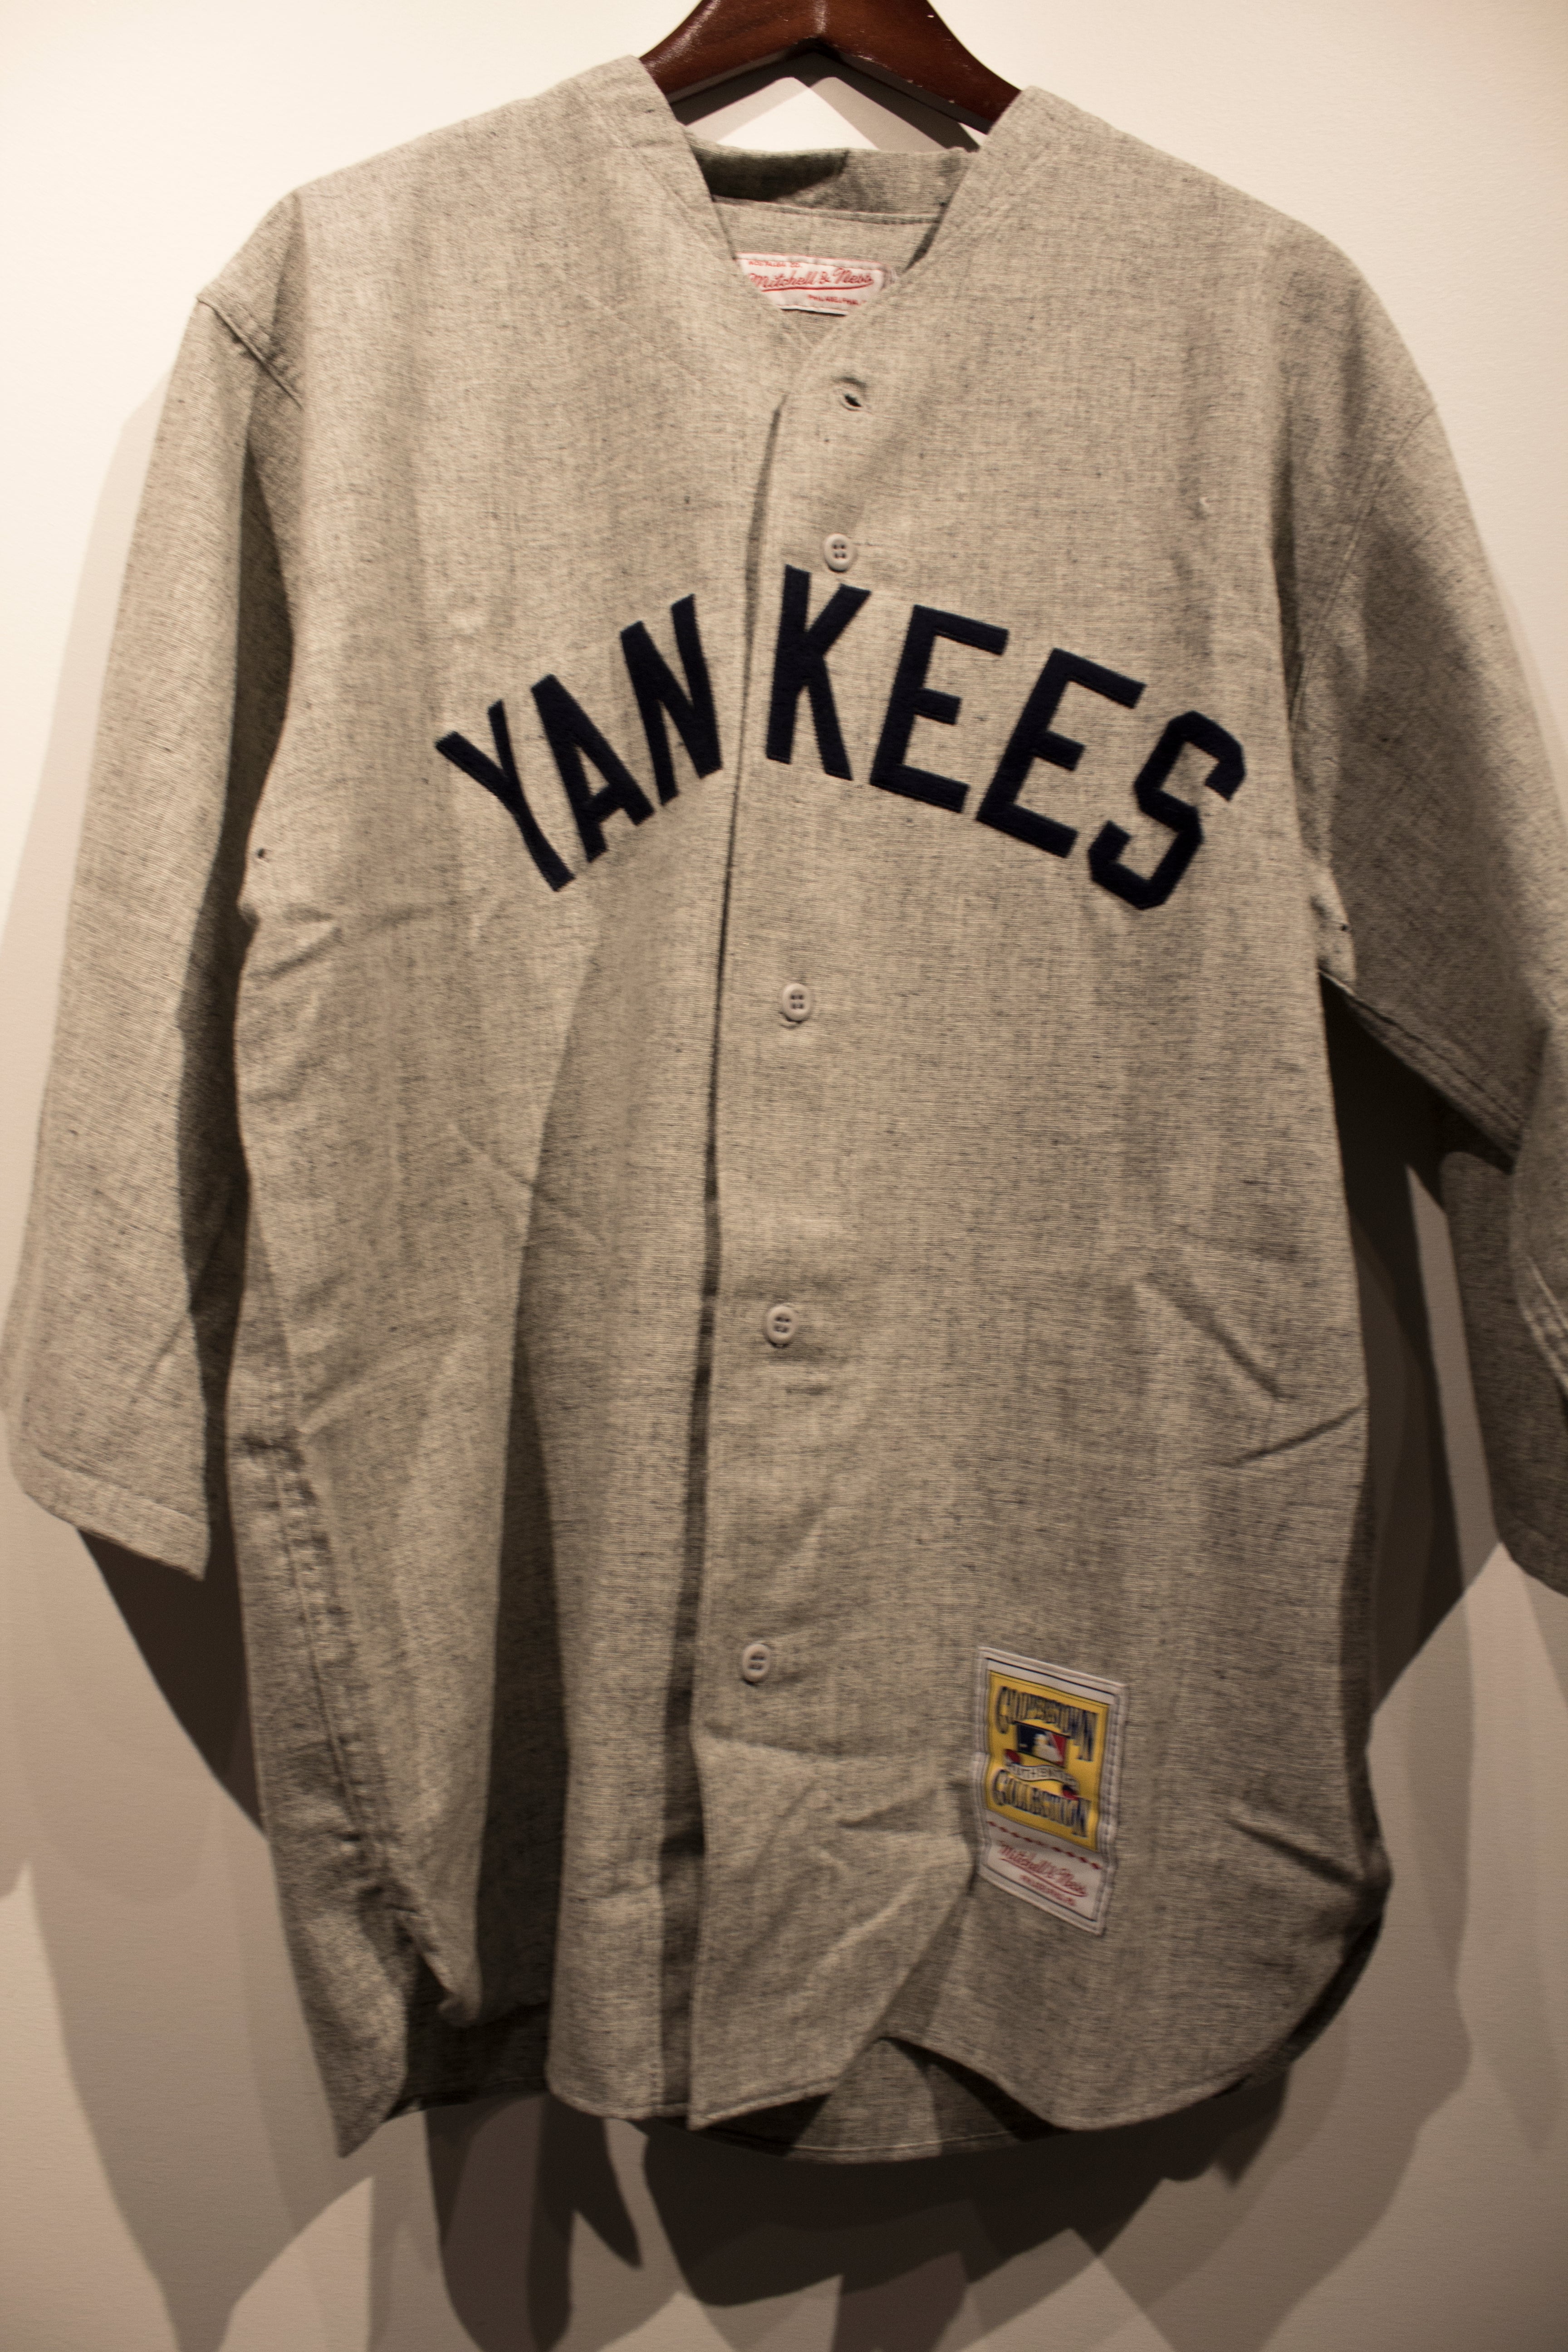 babe ruth mitchell and ness jersey